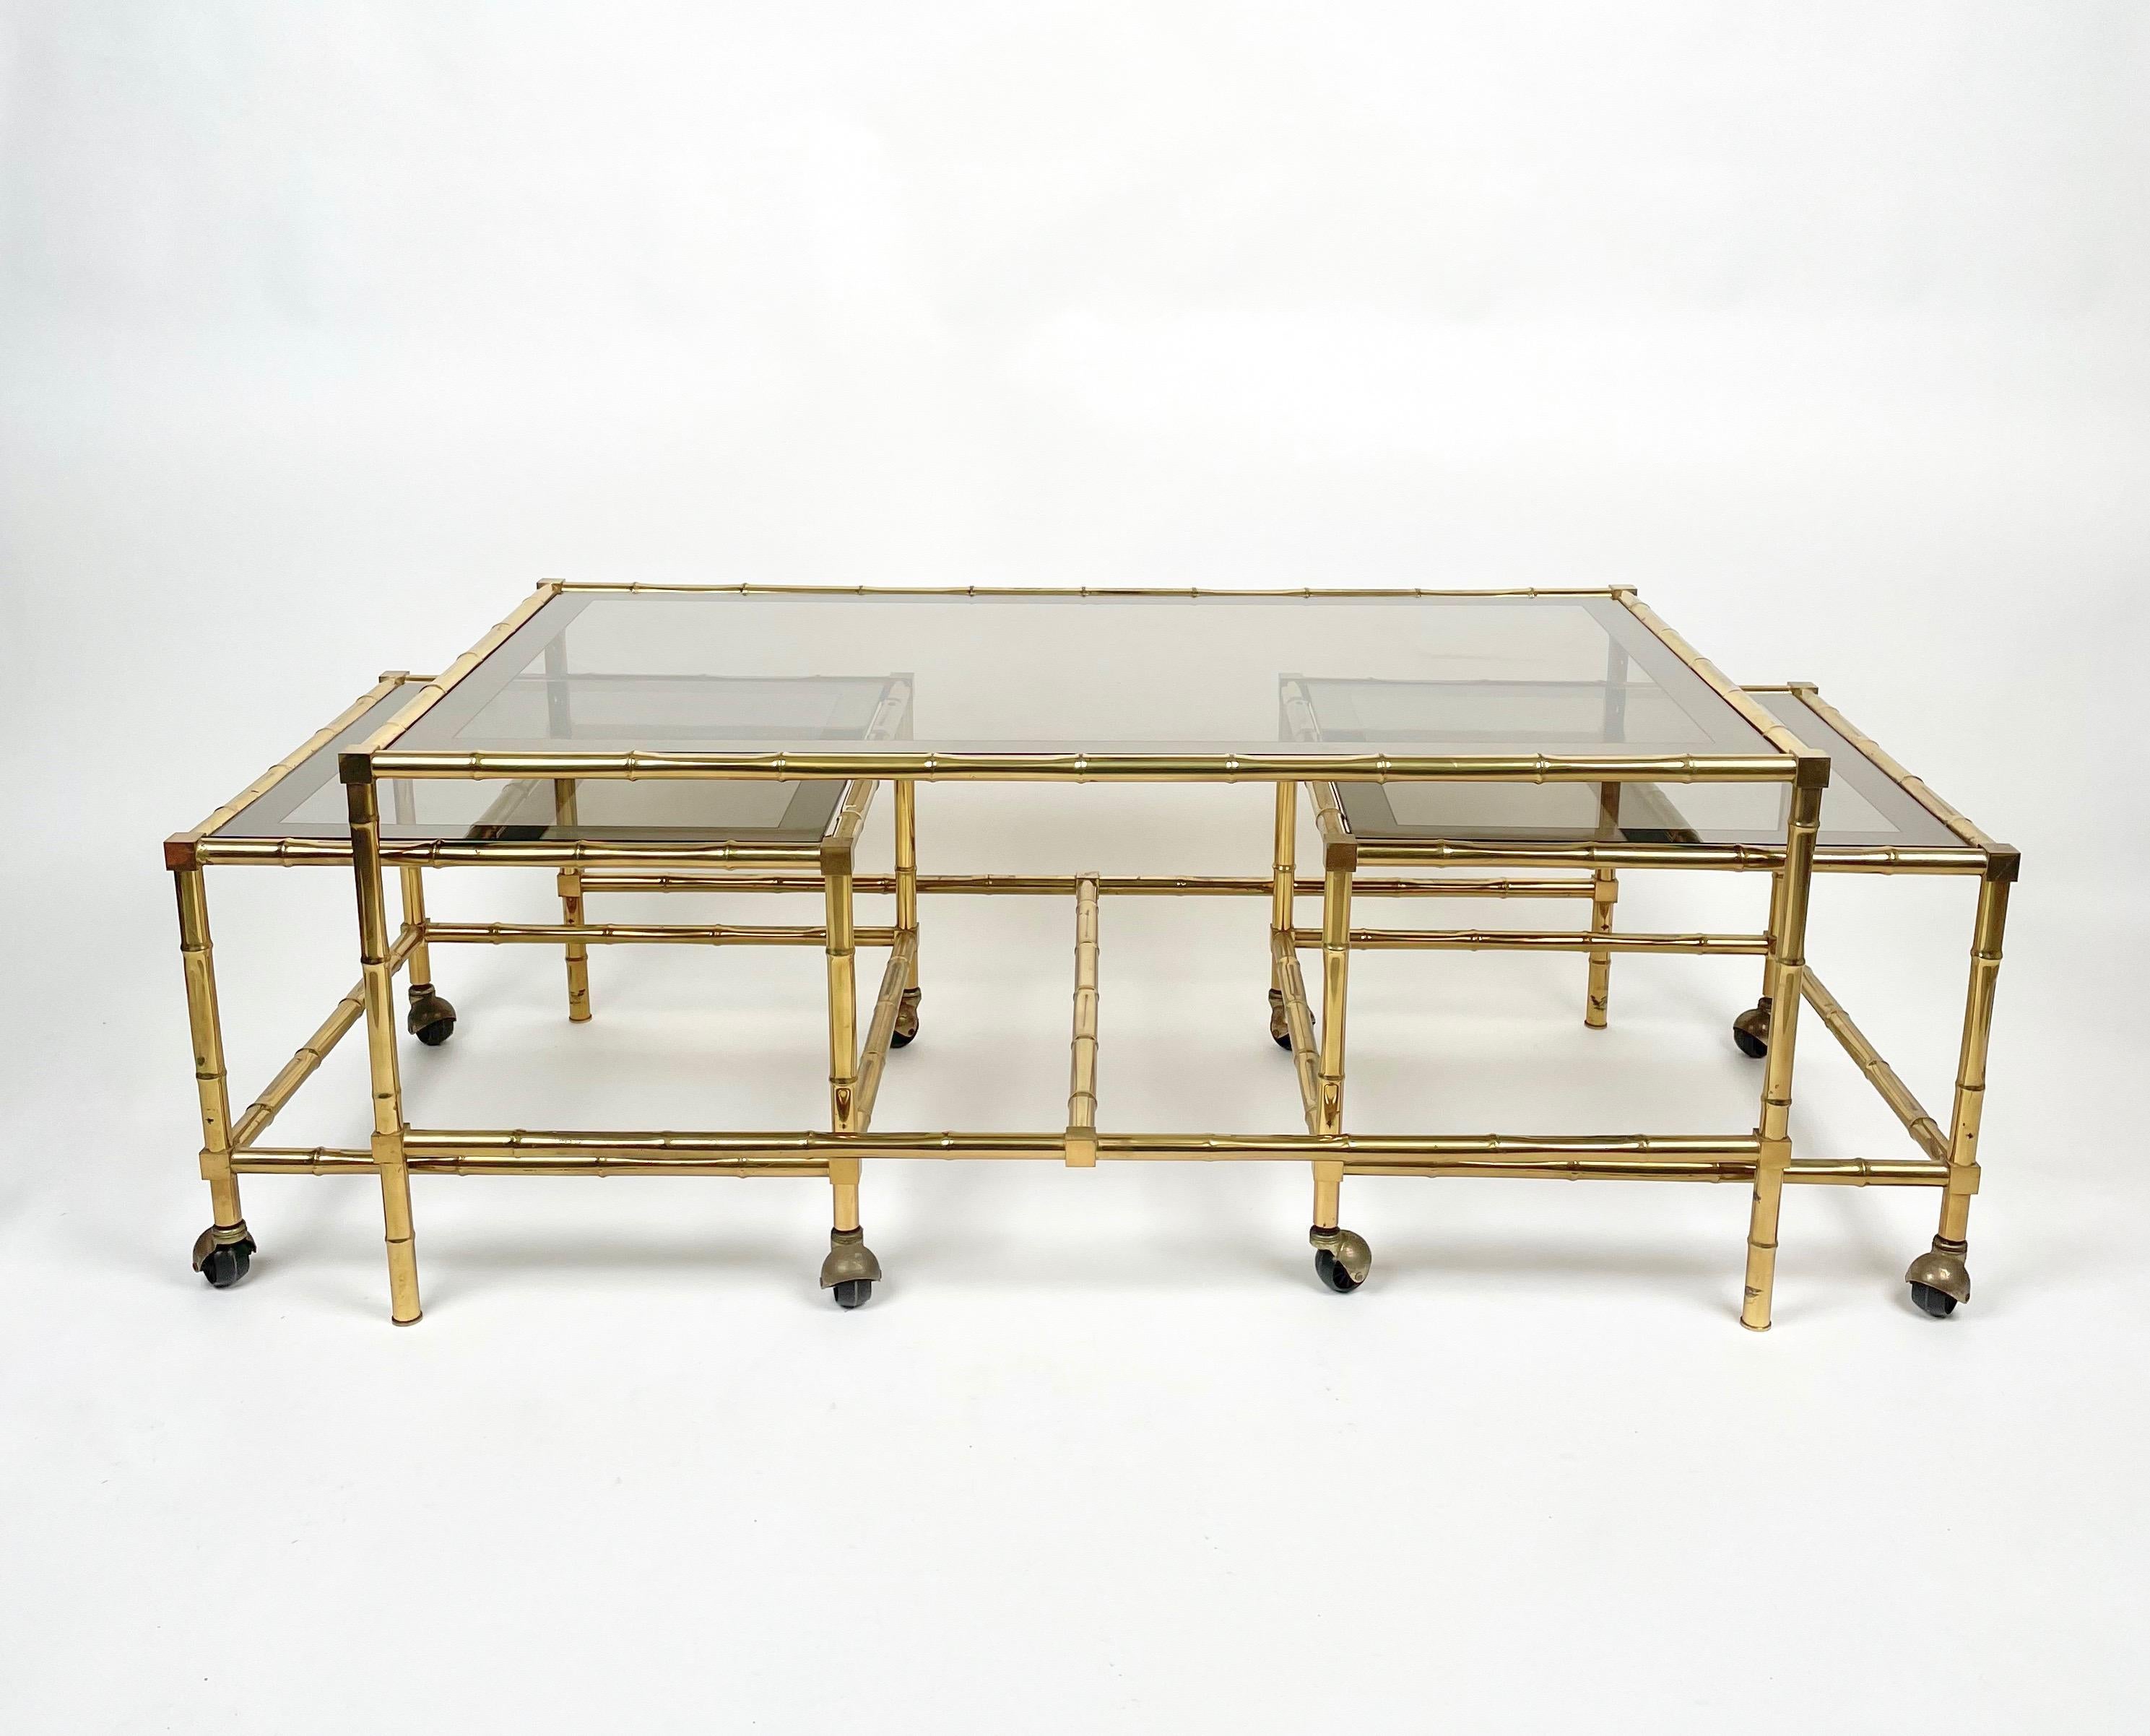 Rectangular coffee table nested with two squared coffee tables on wheels - which can be moved - featuring a brass, faux bamboo structure and smoked glass surface framed by mirror. In the style of the French house Maison Bagues, made in Italy in the